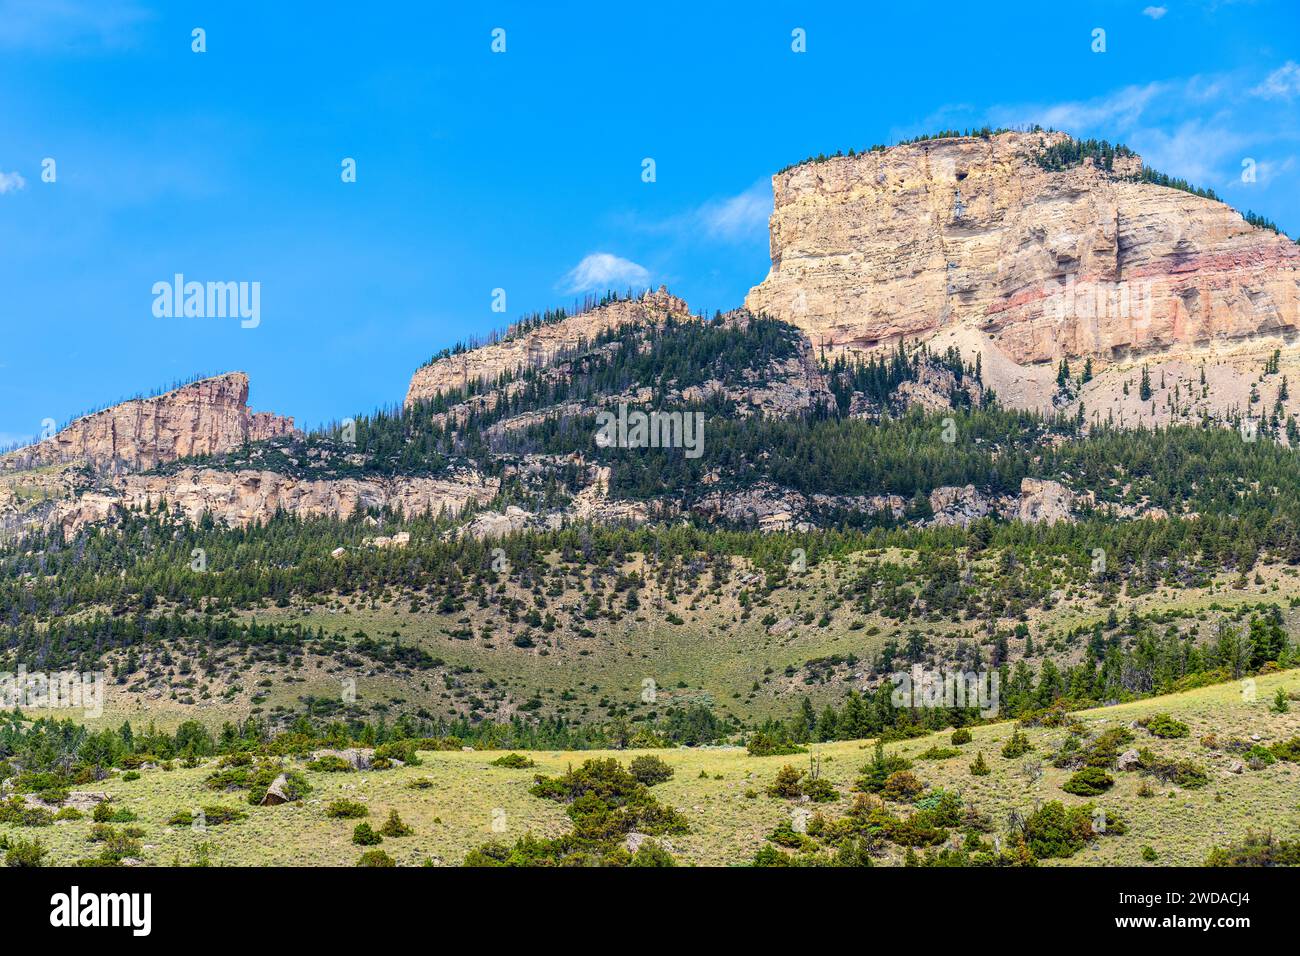 Twin Buttes, Bighorn National Forest in Wyoming, is seen from Bighorn Scenic Byway Route 14 near Burgess Junction. This is a beautiful mountain area. Stock Photo